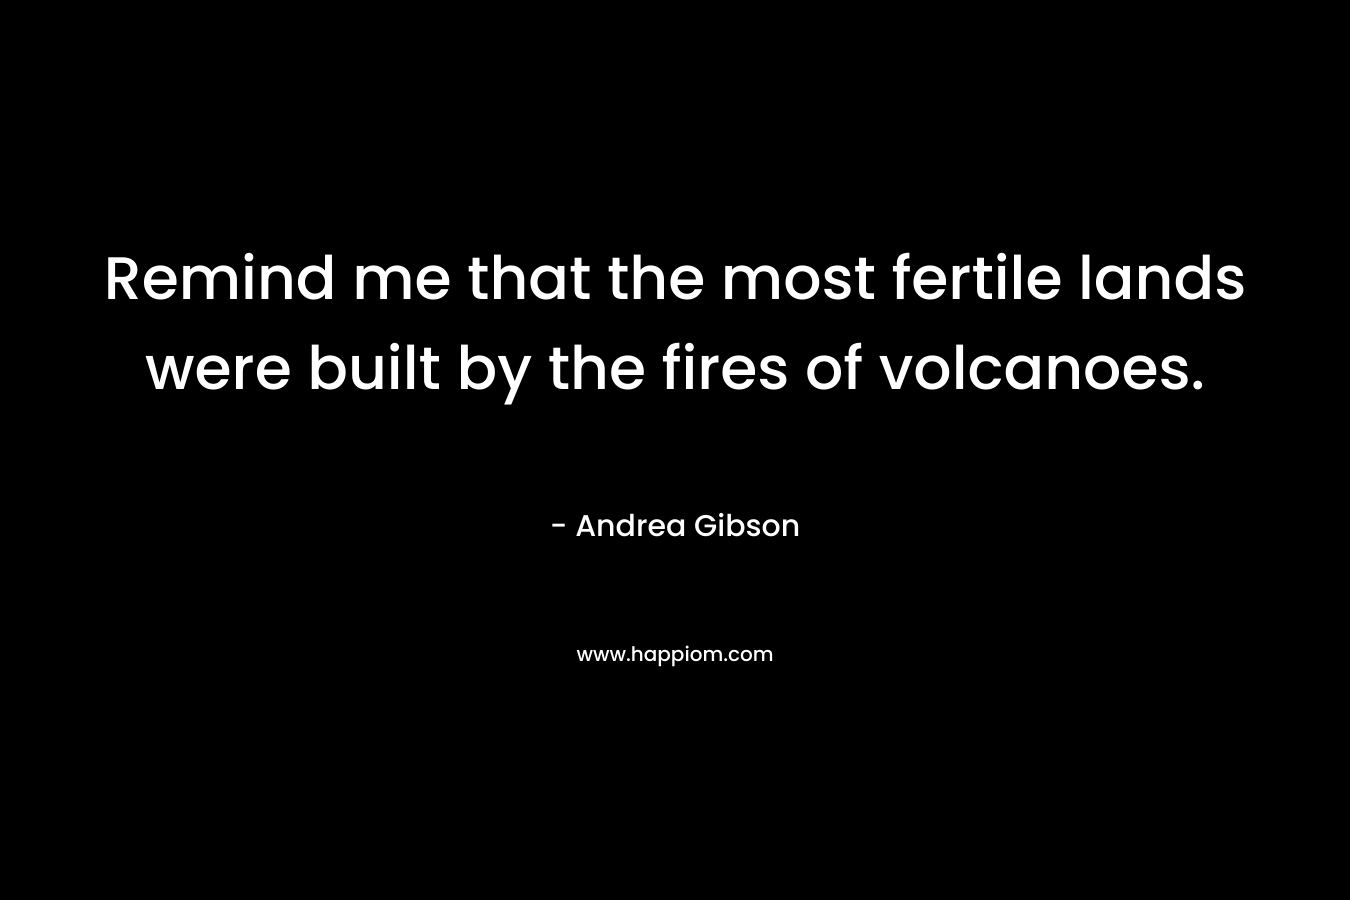 Remind me that the most fertile lands were built by the fires of volcanoes. – Andrea Gibson